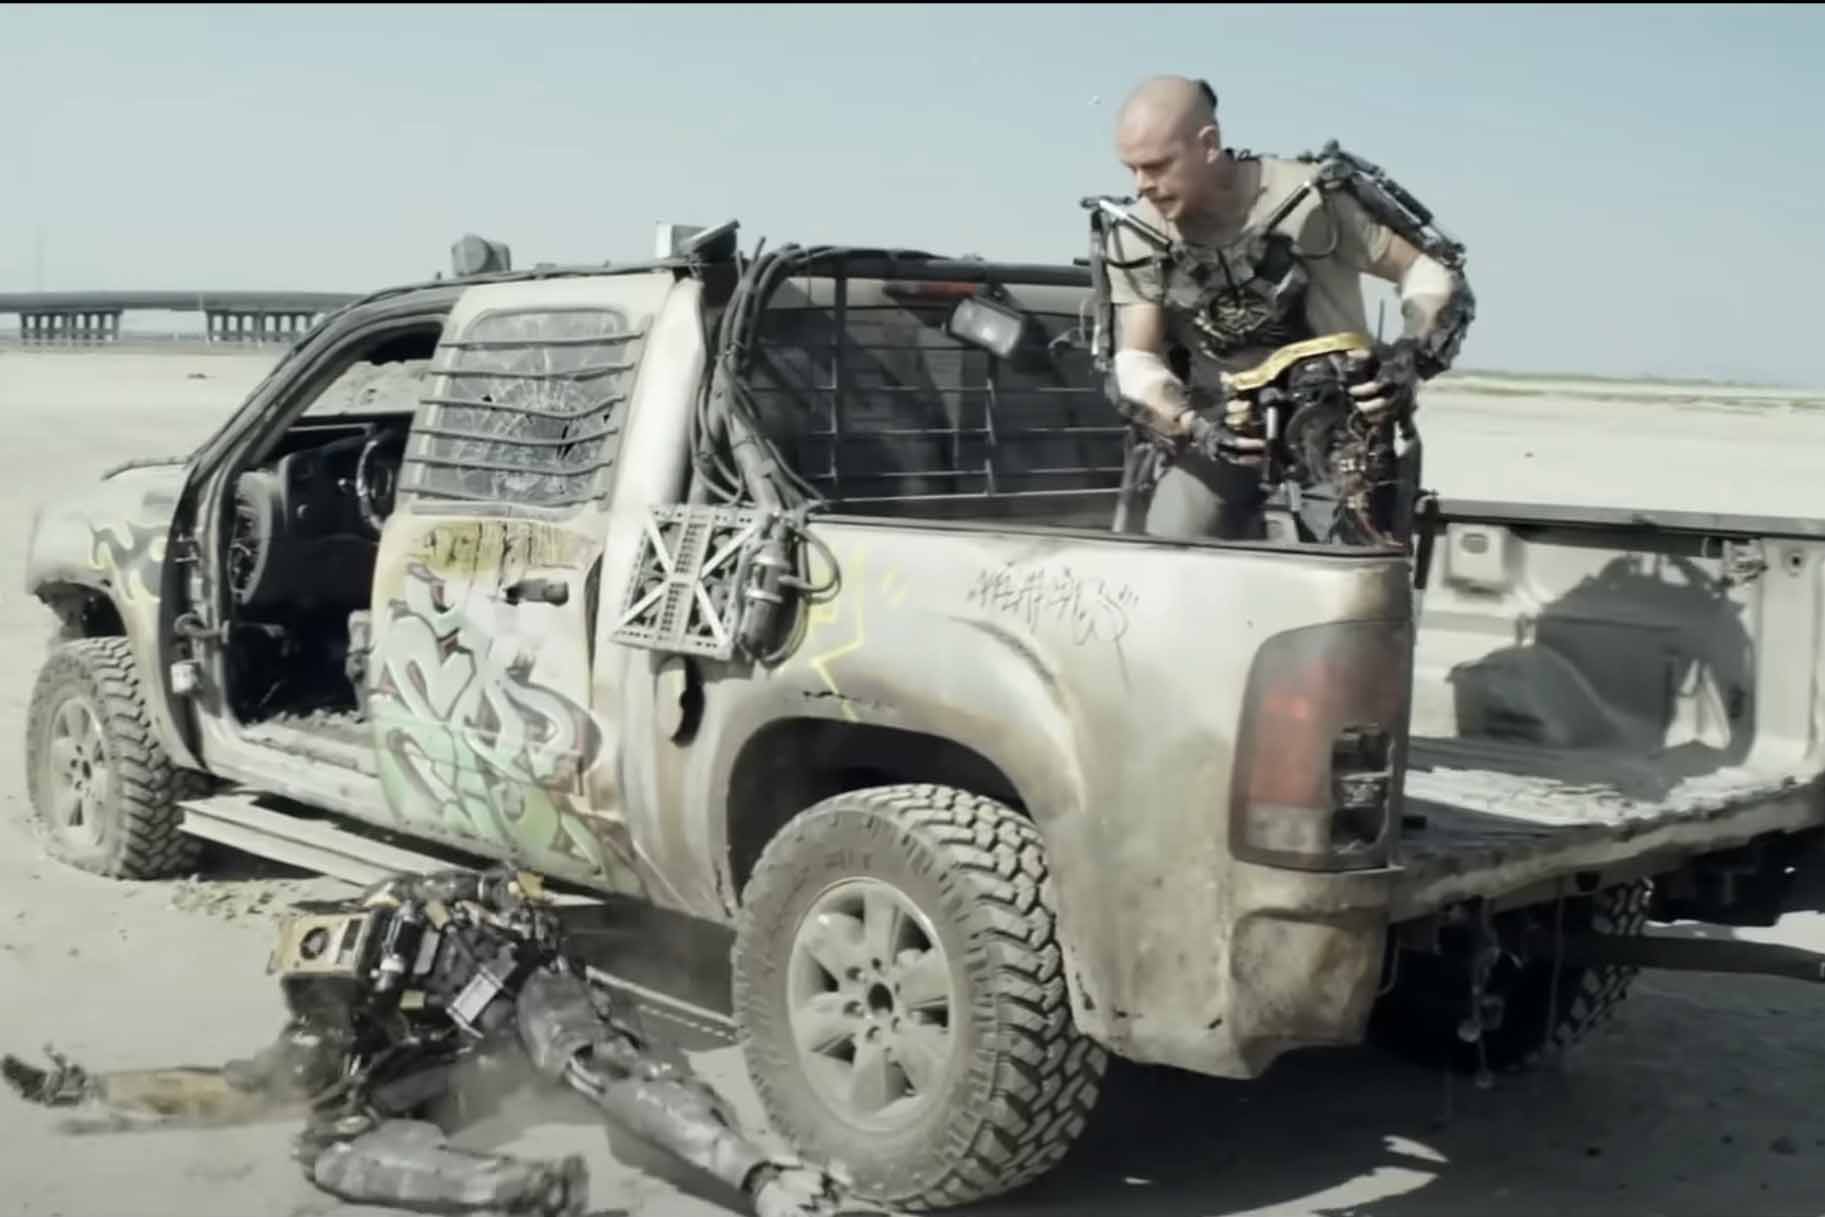 Max DeCosta (Matt Damon) stands in a tuck bed and looks at a decapitated robot in Elysium (2013).